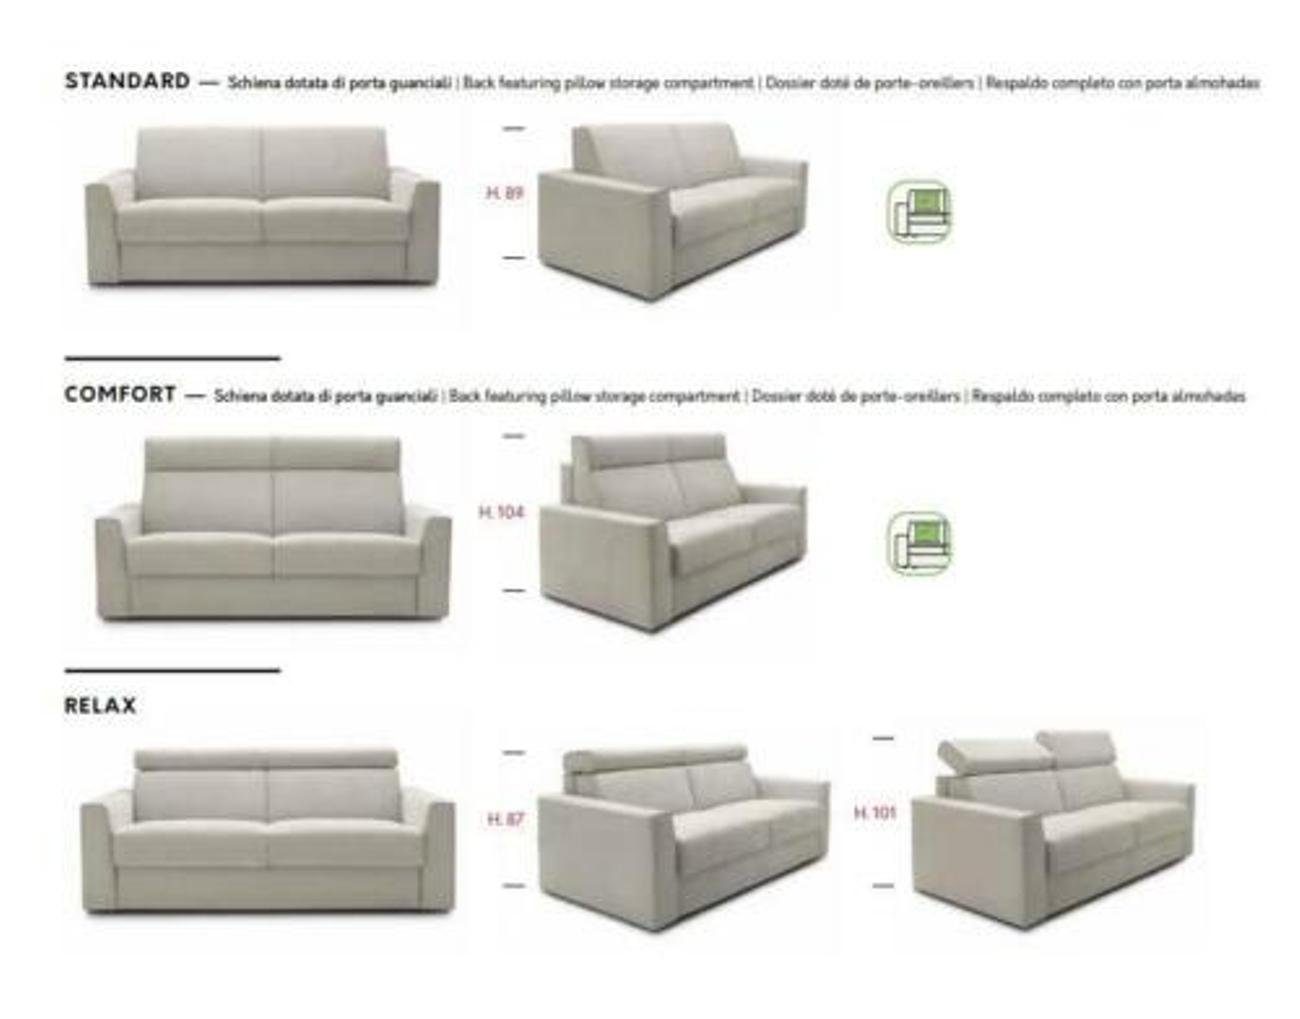 JVmoebel 2-Sitzer, Club Sofa Polster Sofa Lounge Couchen Couch